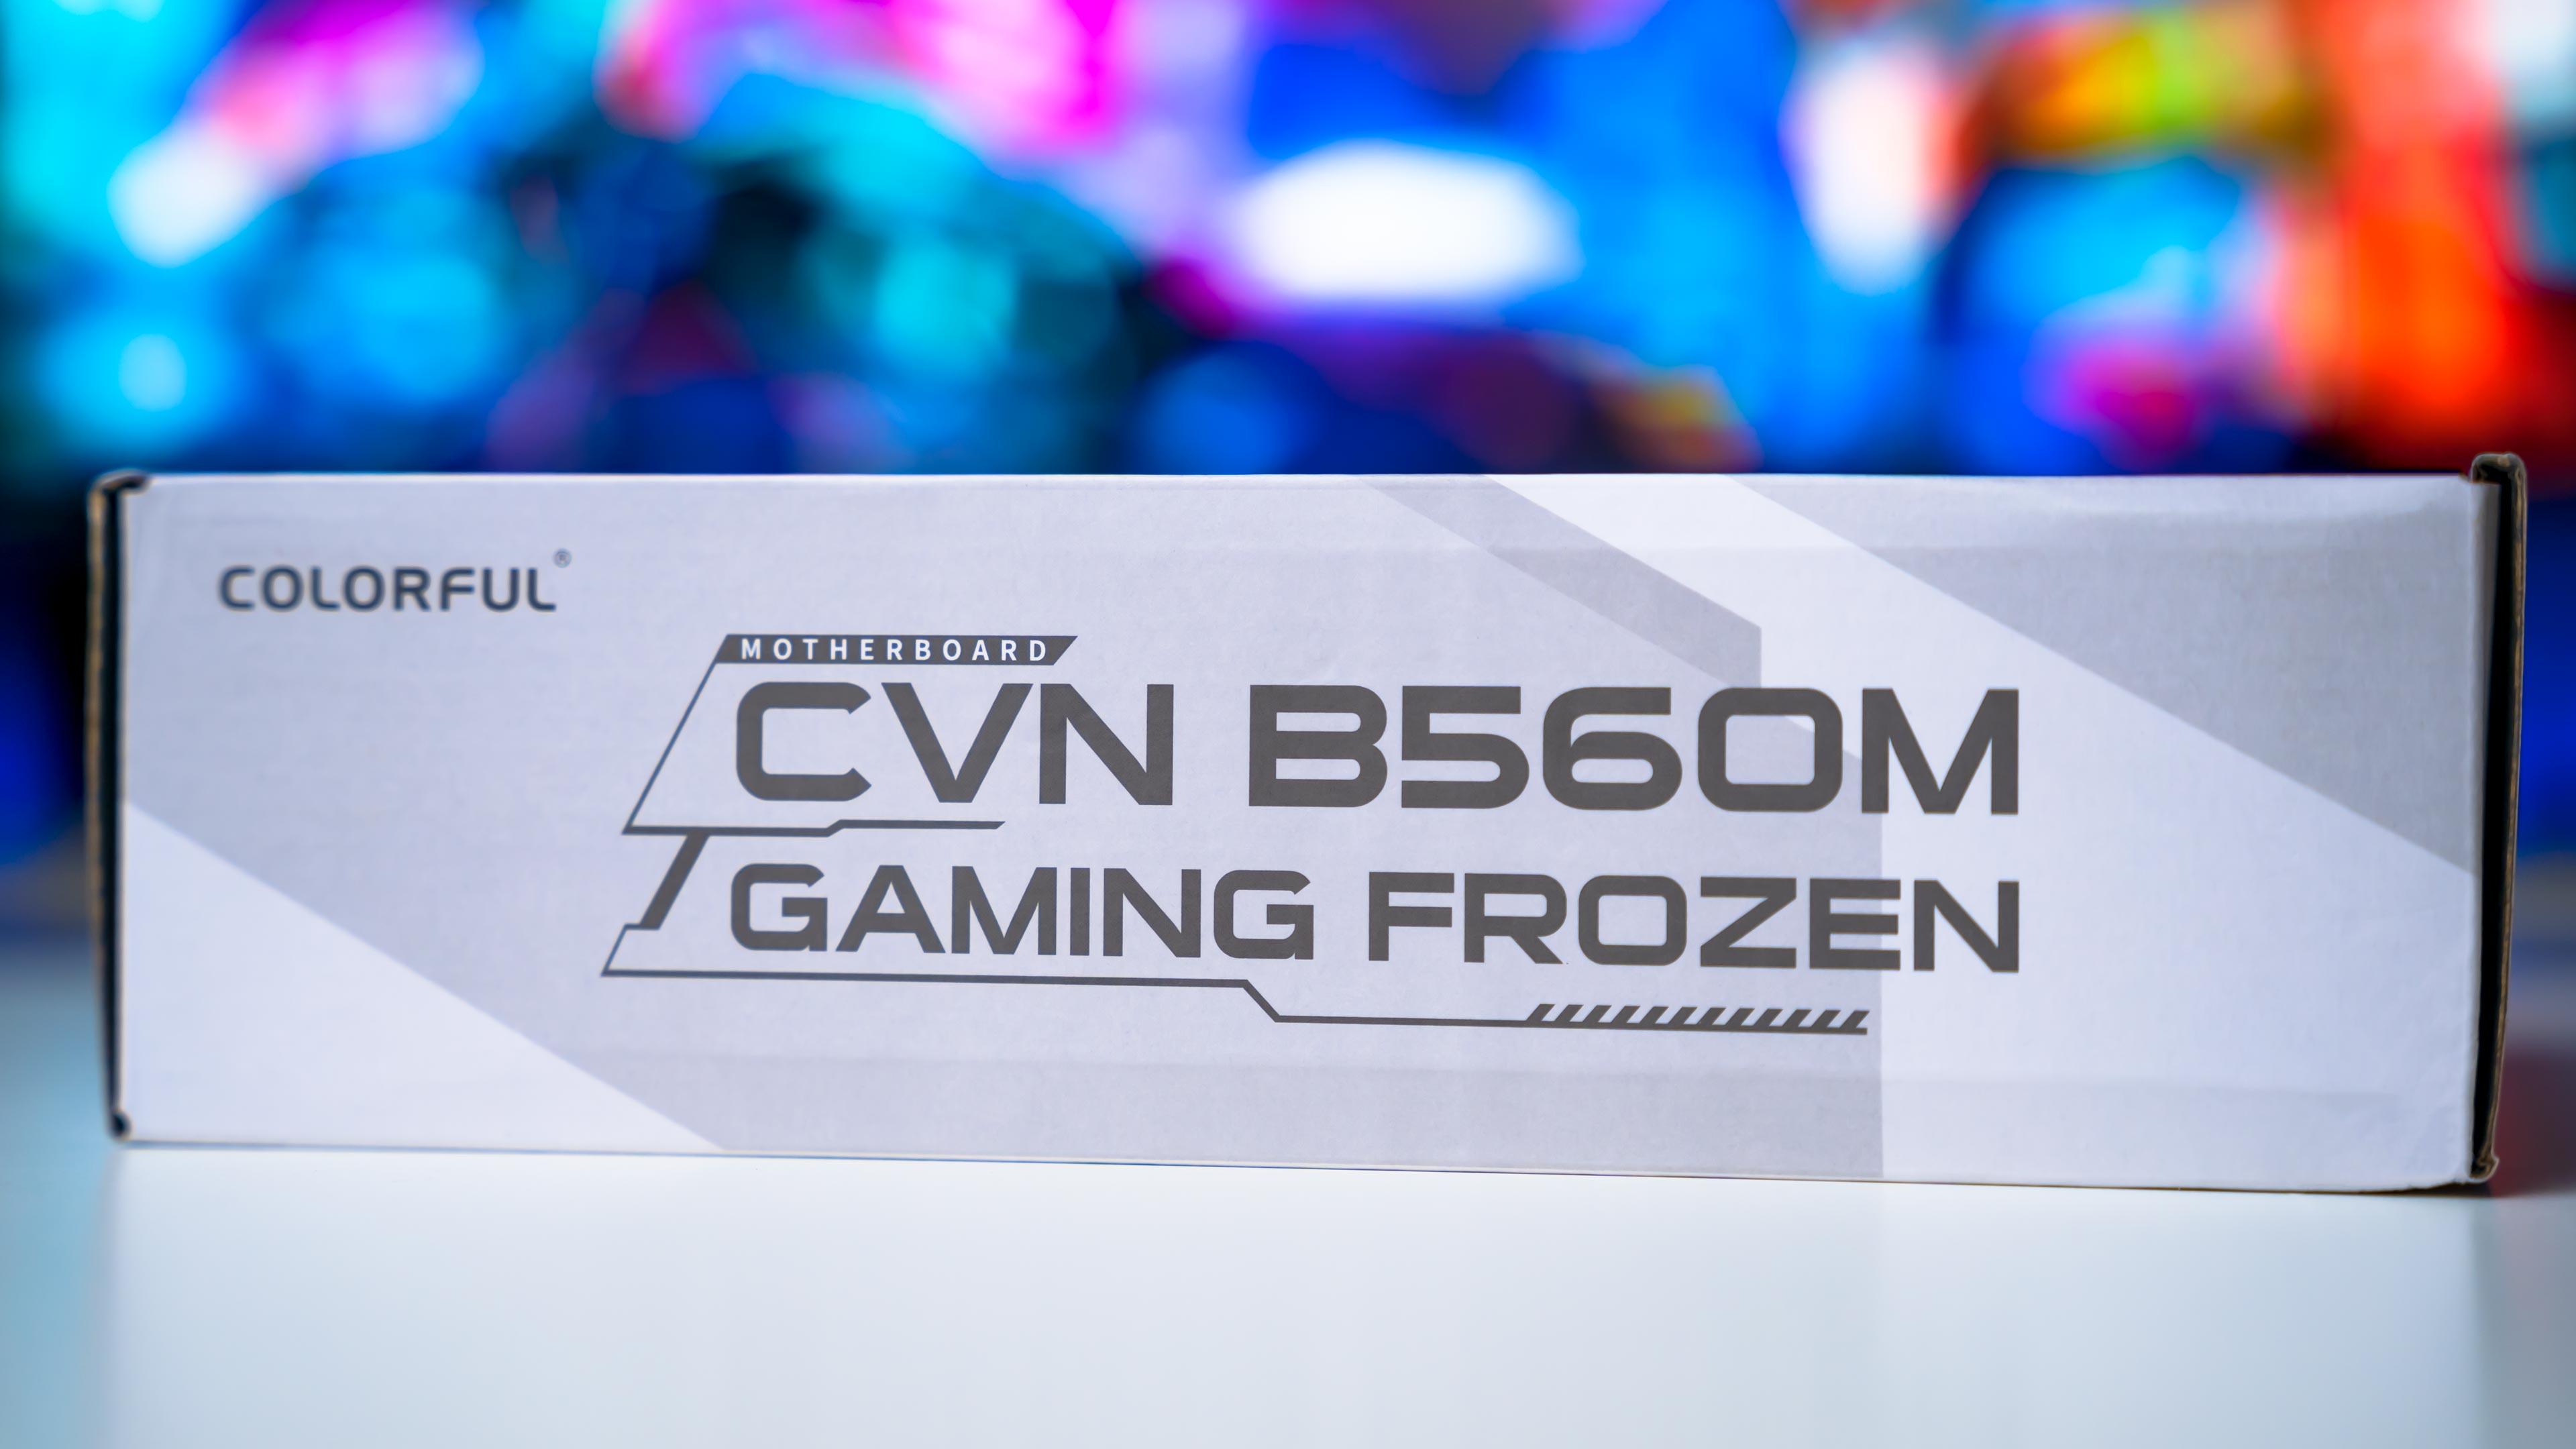 Colorful B560M CVN Gaming Frozen Box (2)